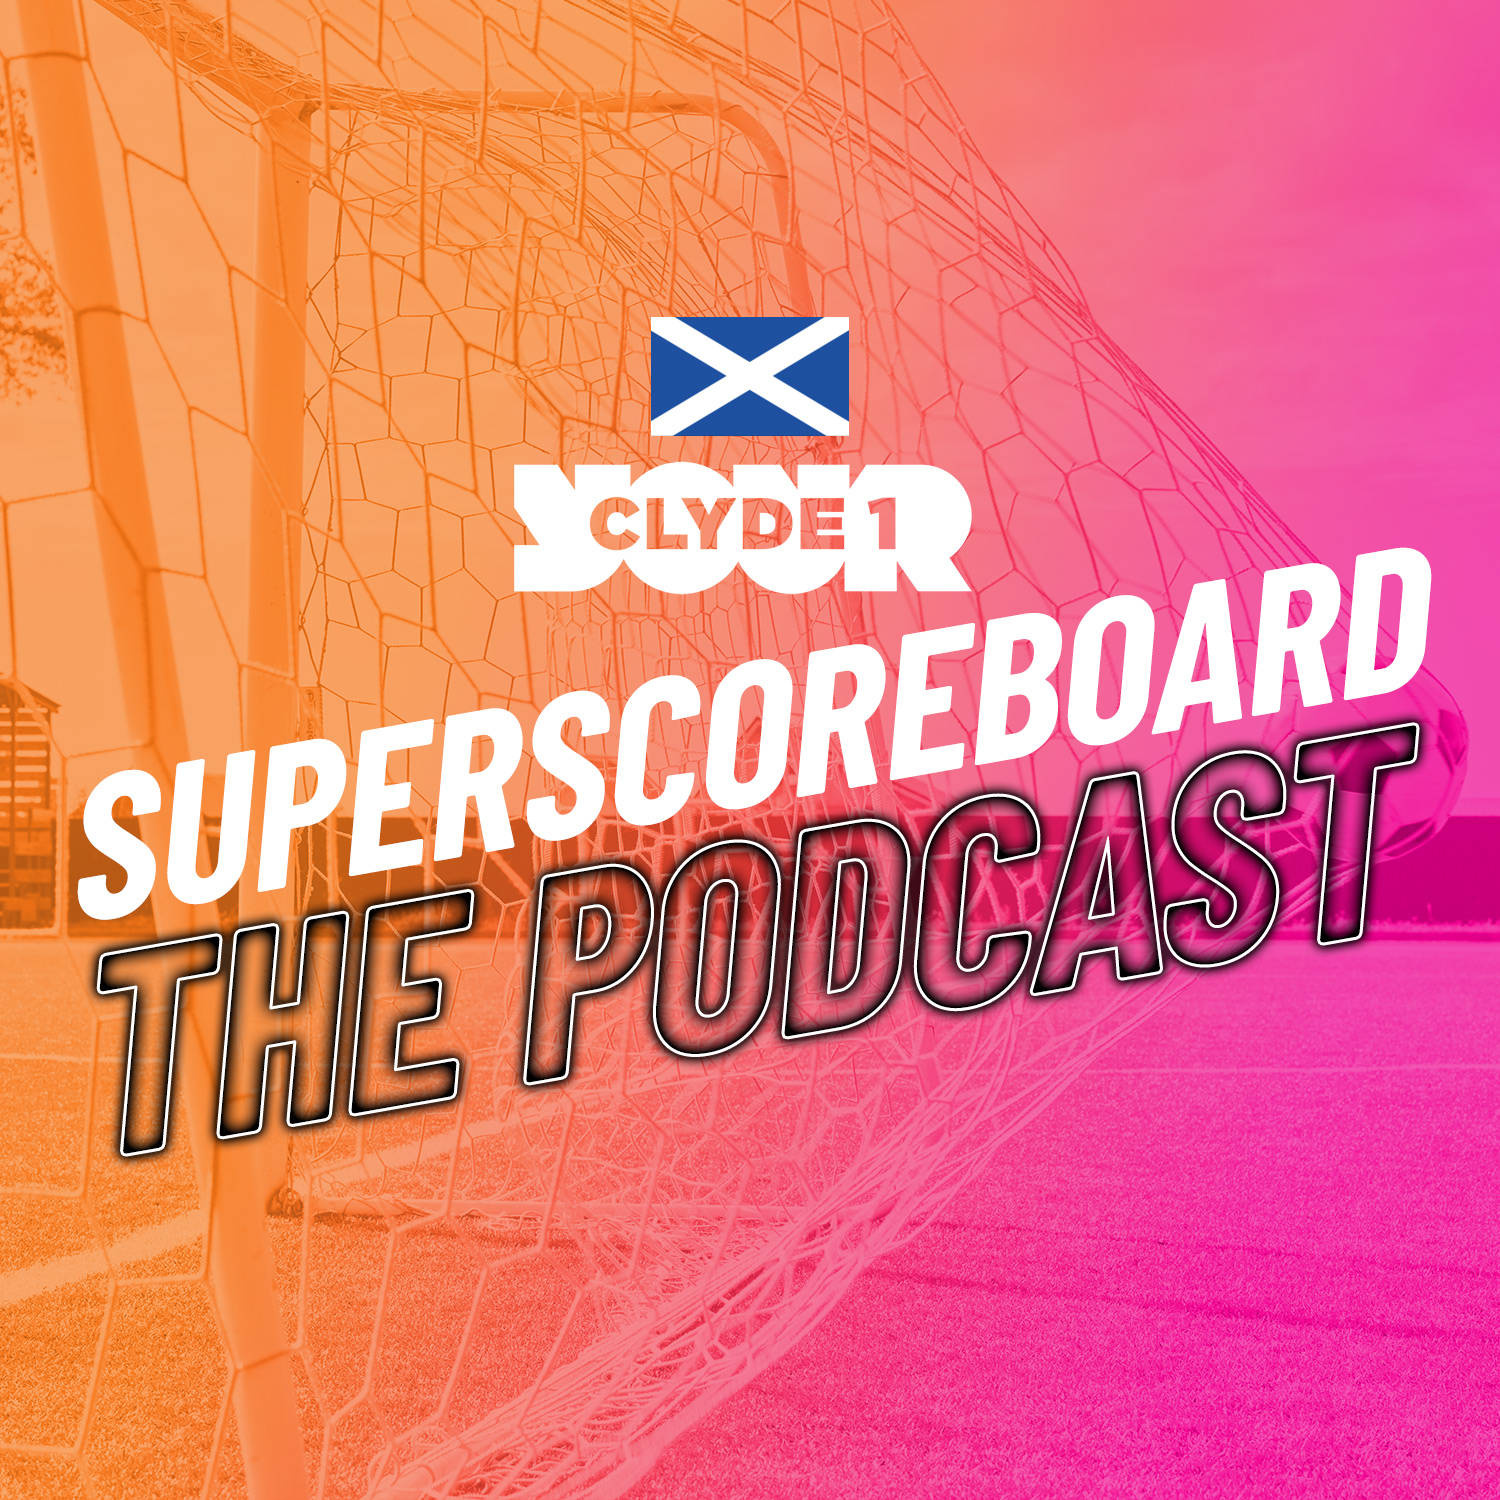 Sunday 28th April Clyde 1 Superscoreboard – Part 1